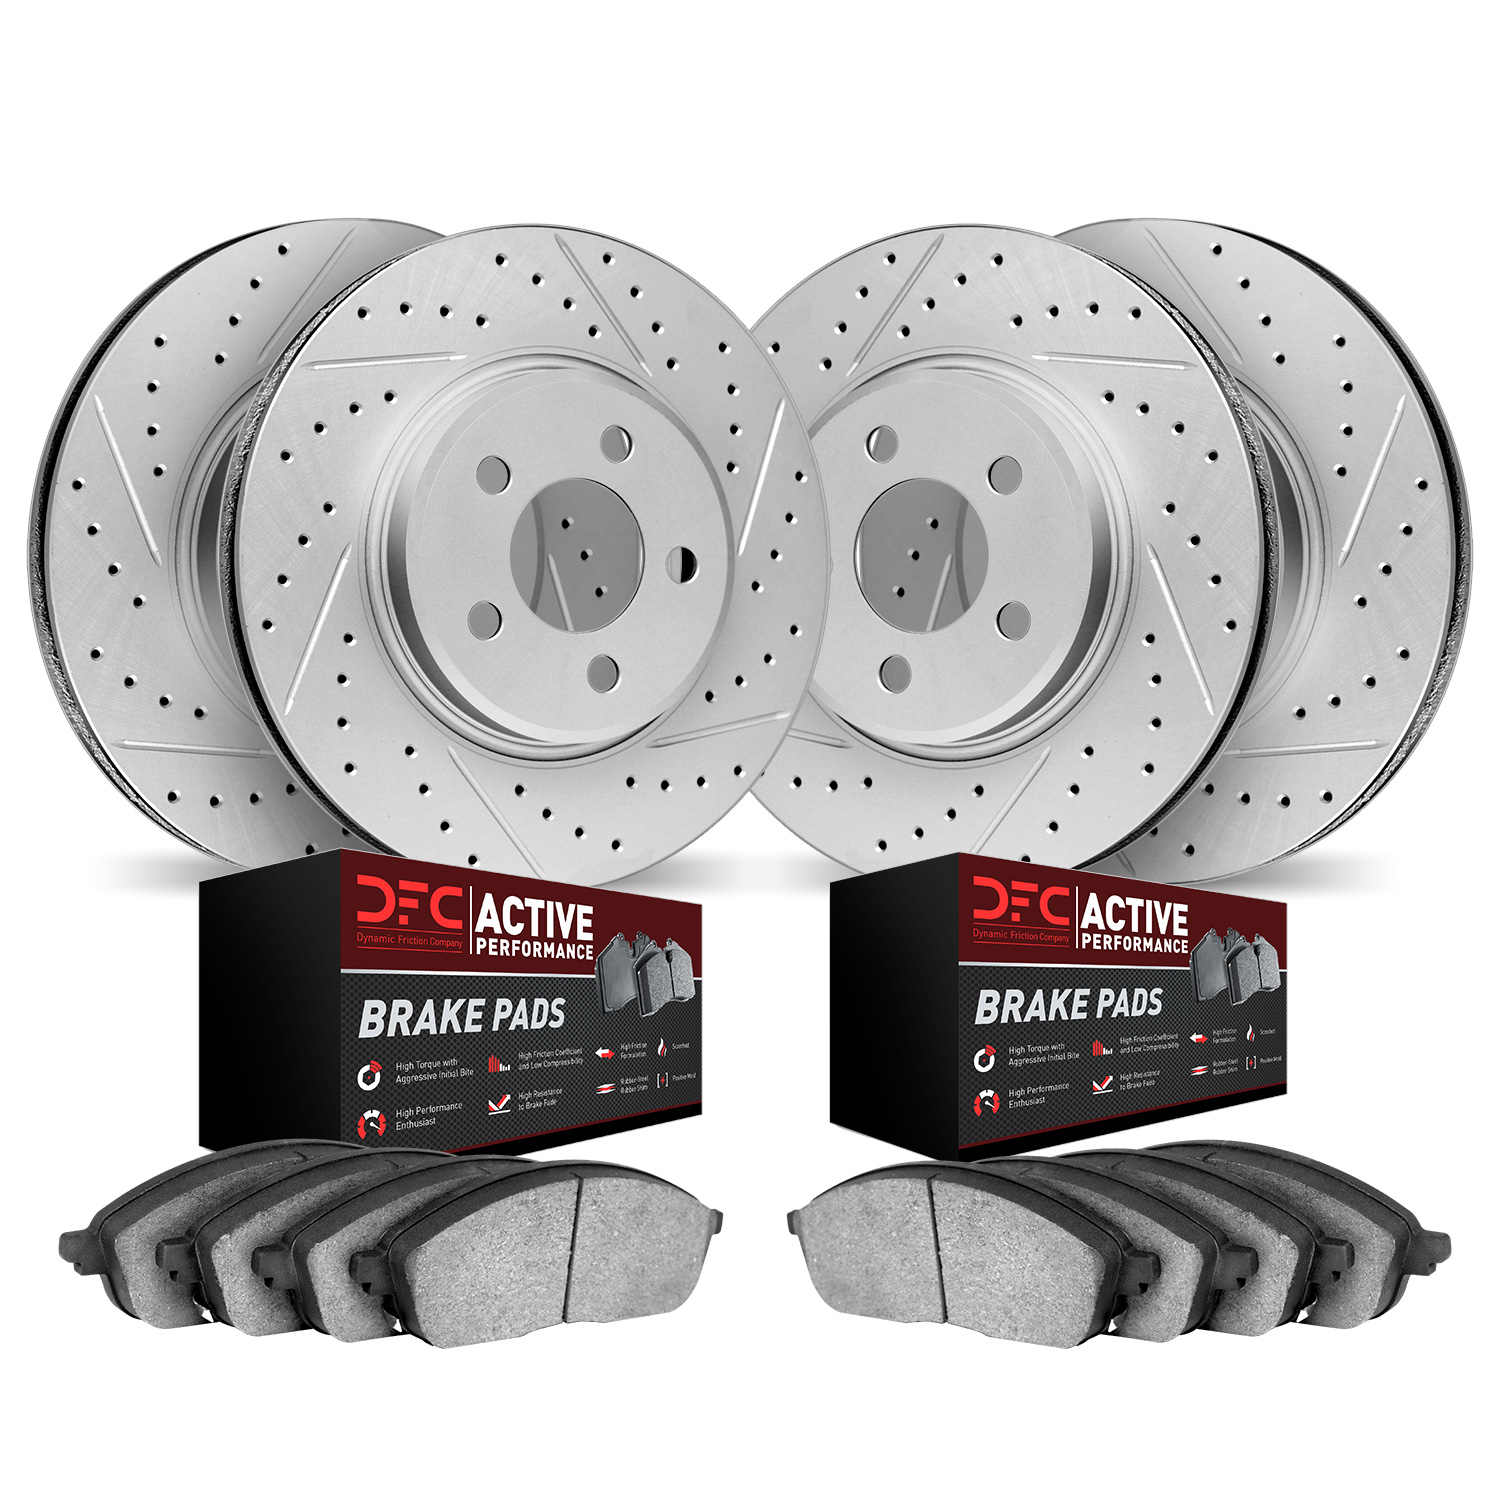 2704-31068 Geoperformance Drilled/Slotted Brake Rotors with Active Performance Pads Kit, 2006-2007 BMW, Position: Front and Rear